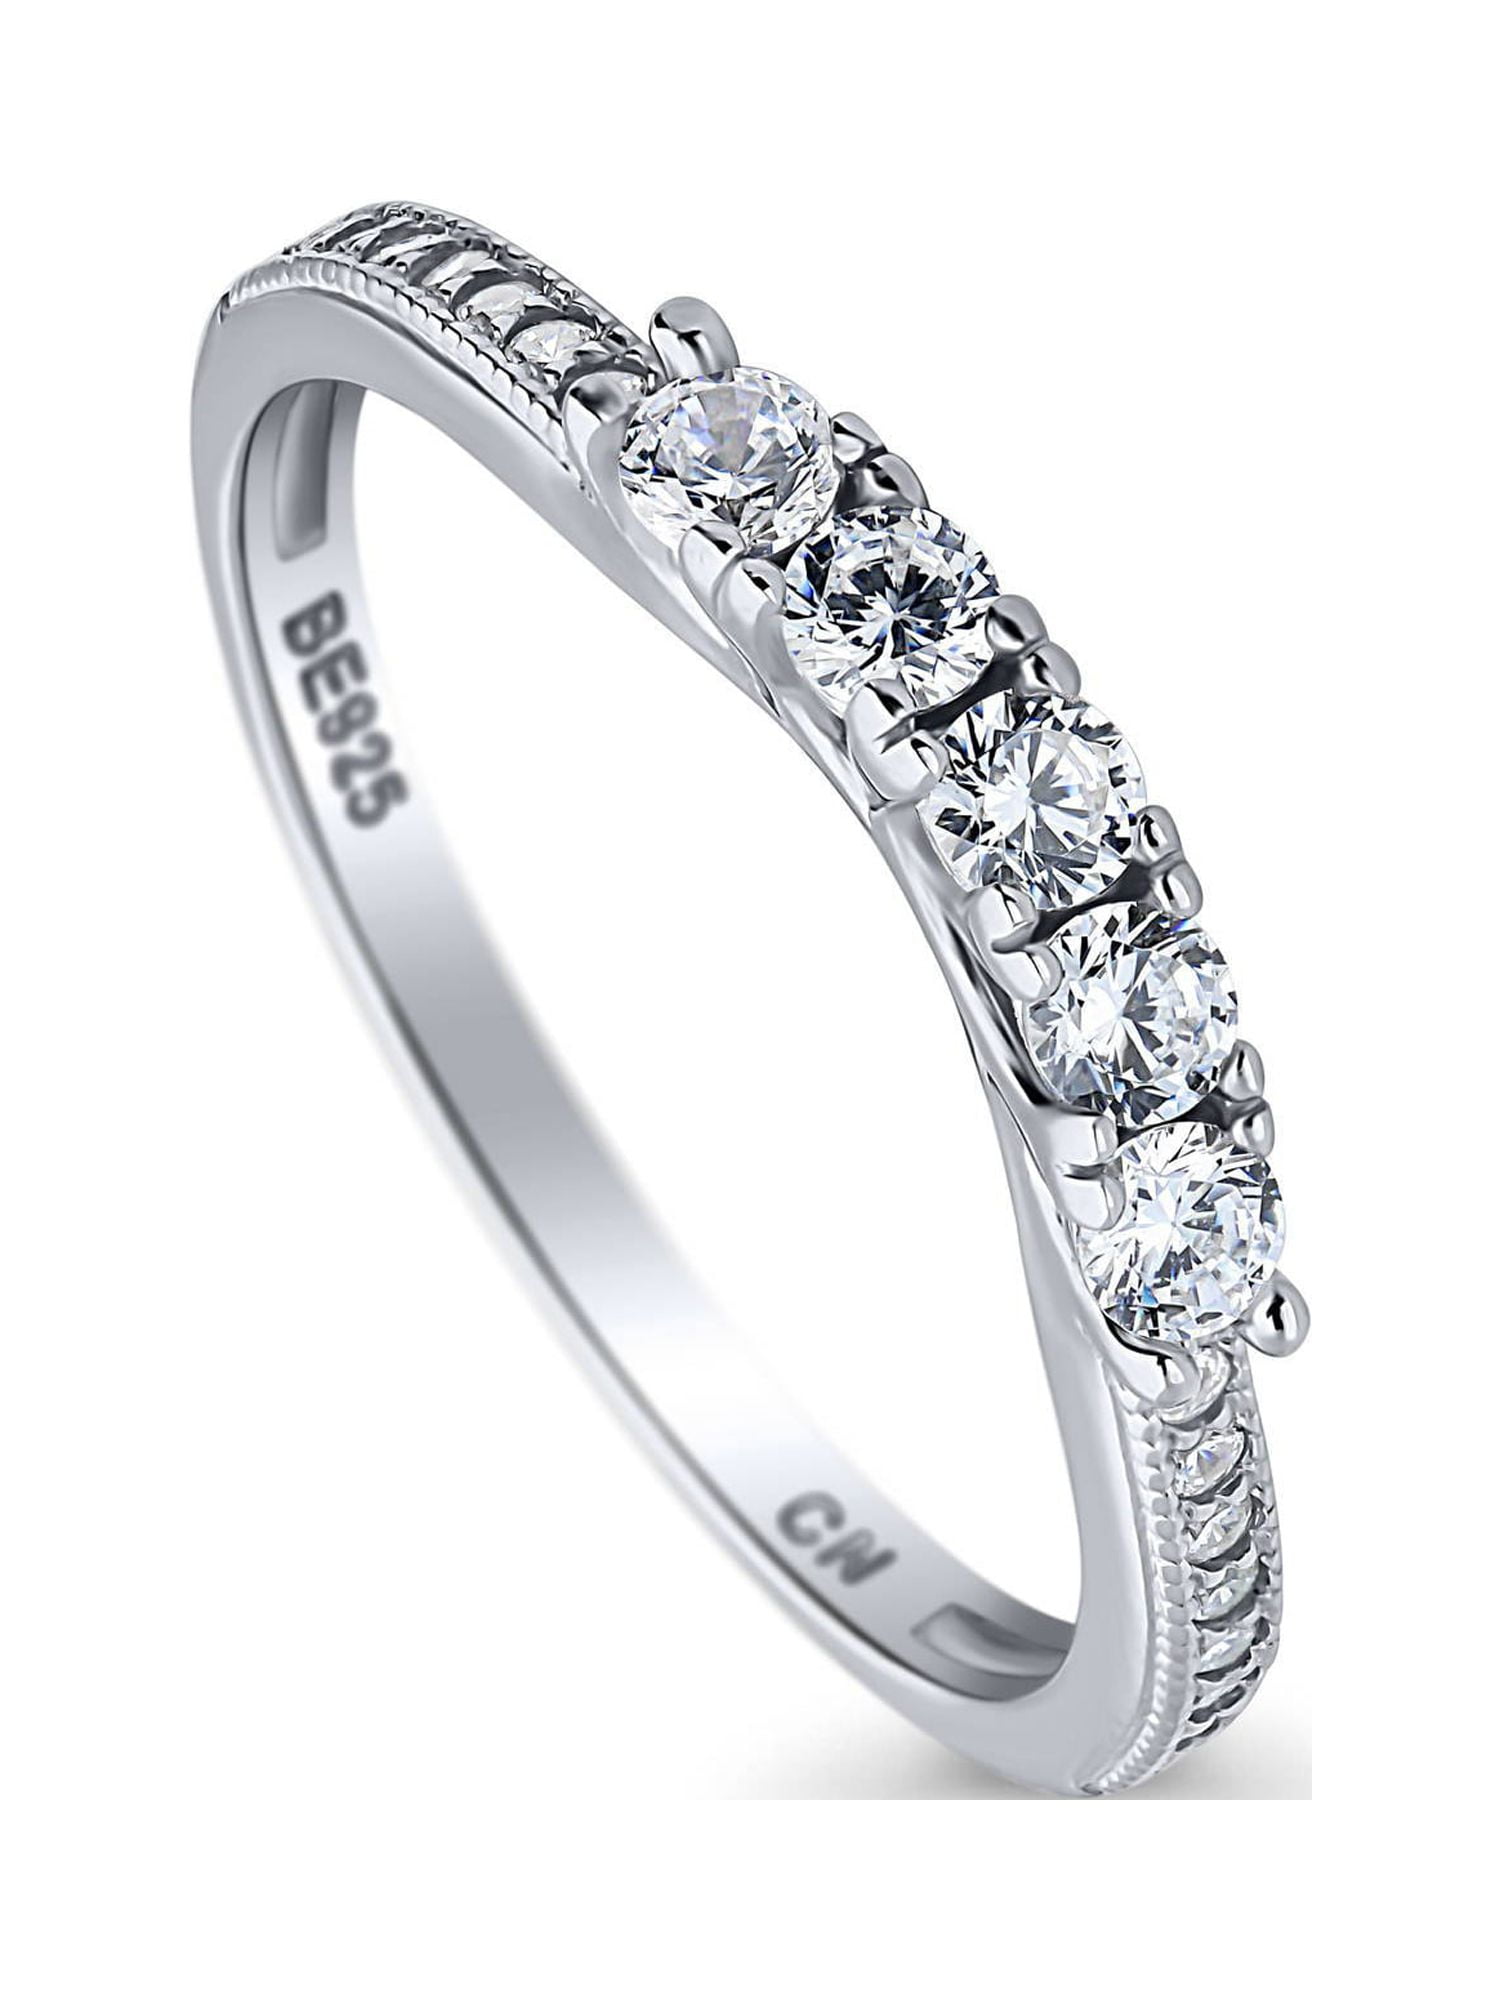 BERRICLE Sterling Silver 5-Stone Wedding Rings Cubic Zirconia CZ